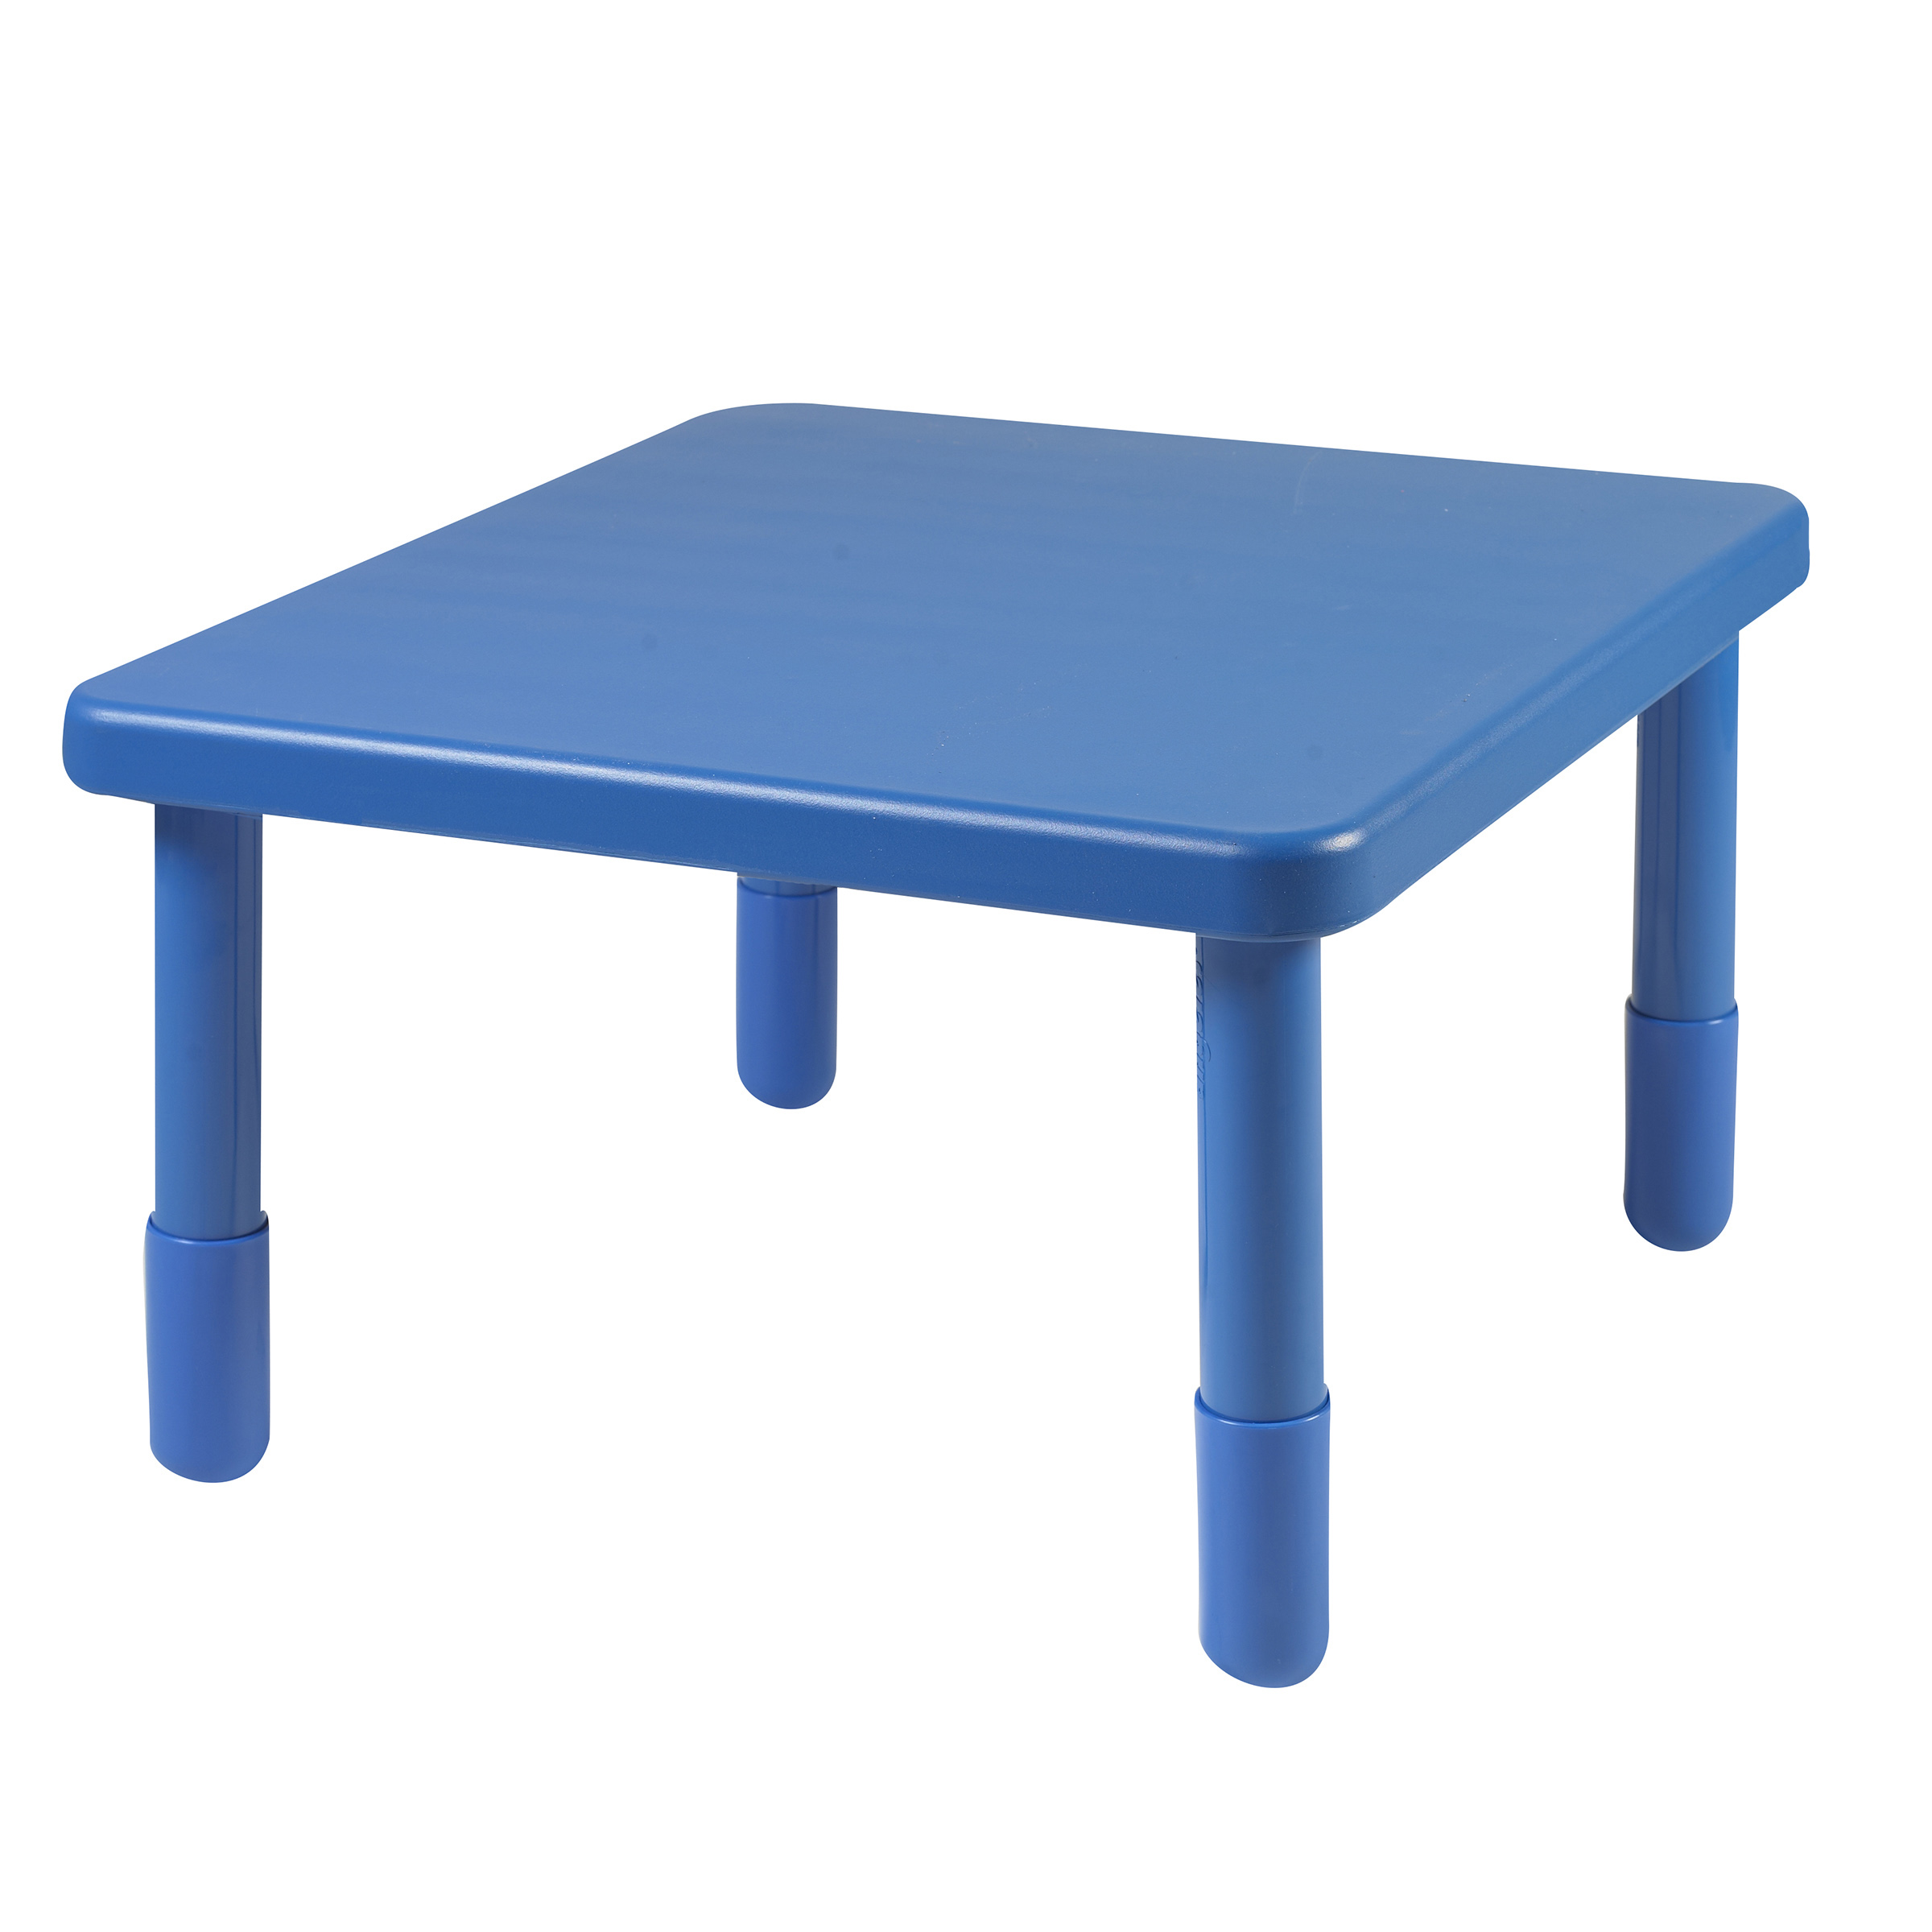 Value 71 cm  Square Table - Royal Blue with 45,5 cm  Legs